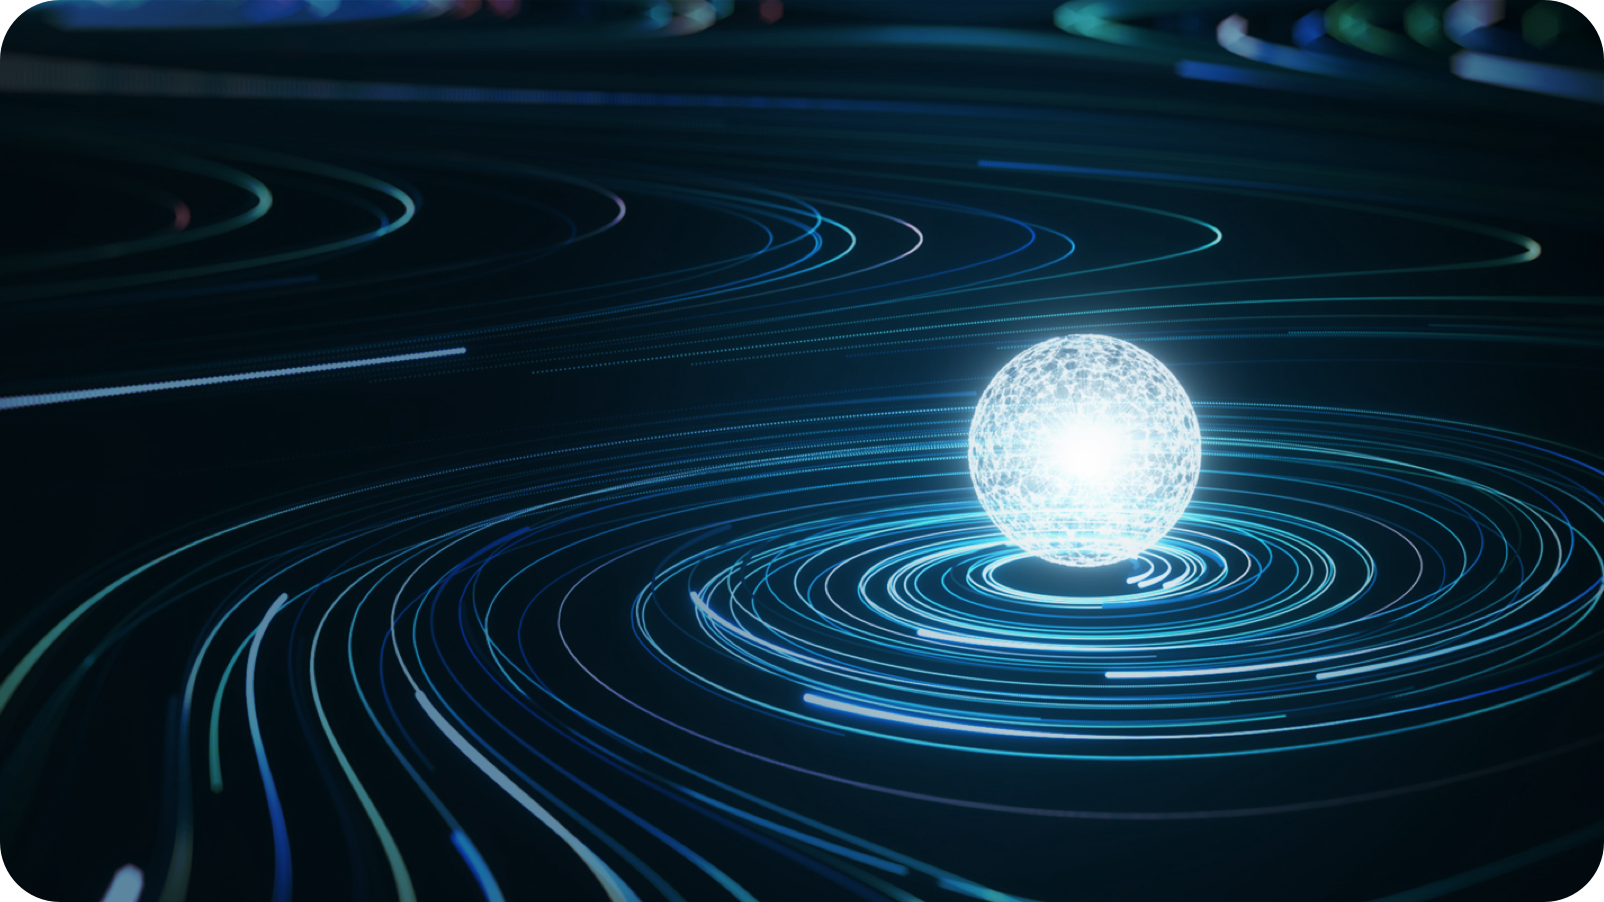 A glowing sphere with a ripple effect on a digital wave-patterned surface, conveying a sense of advanced technology